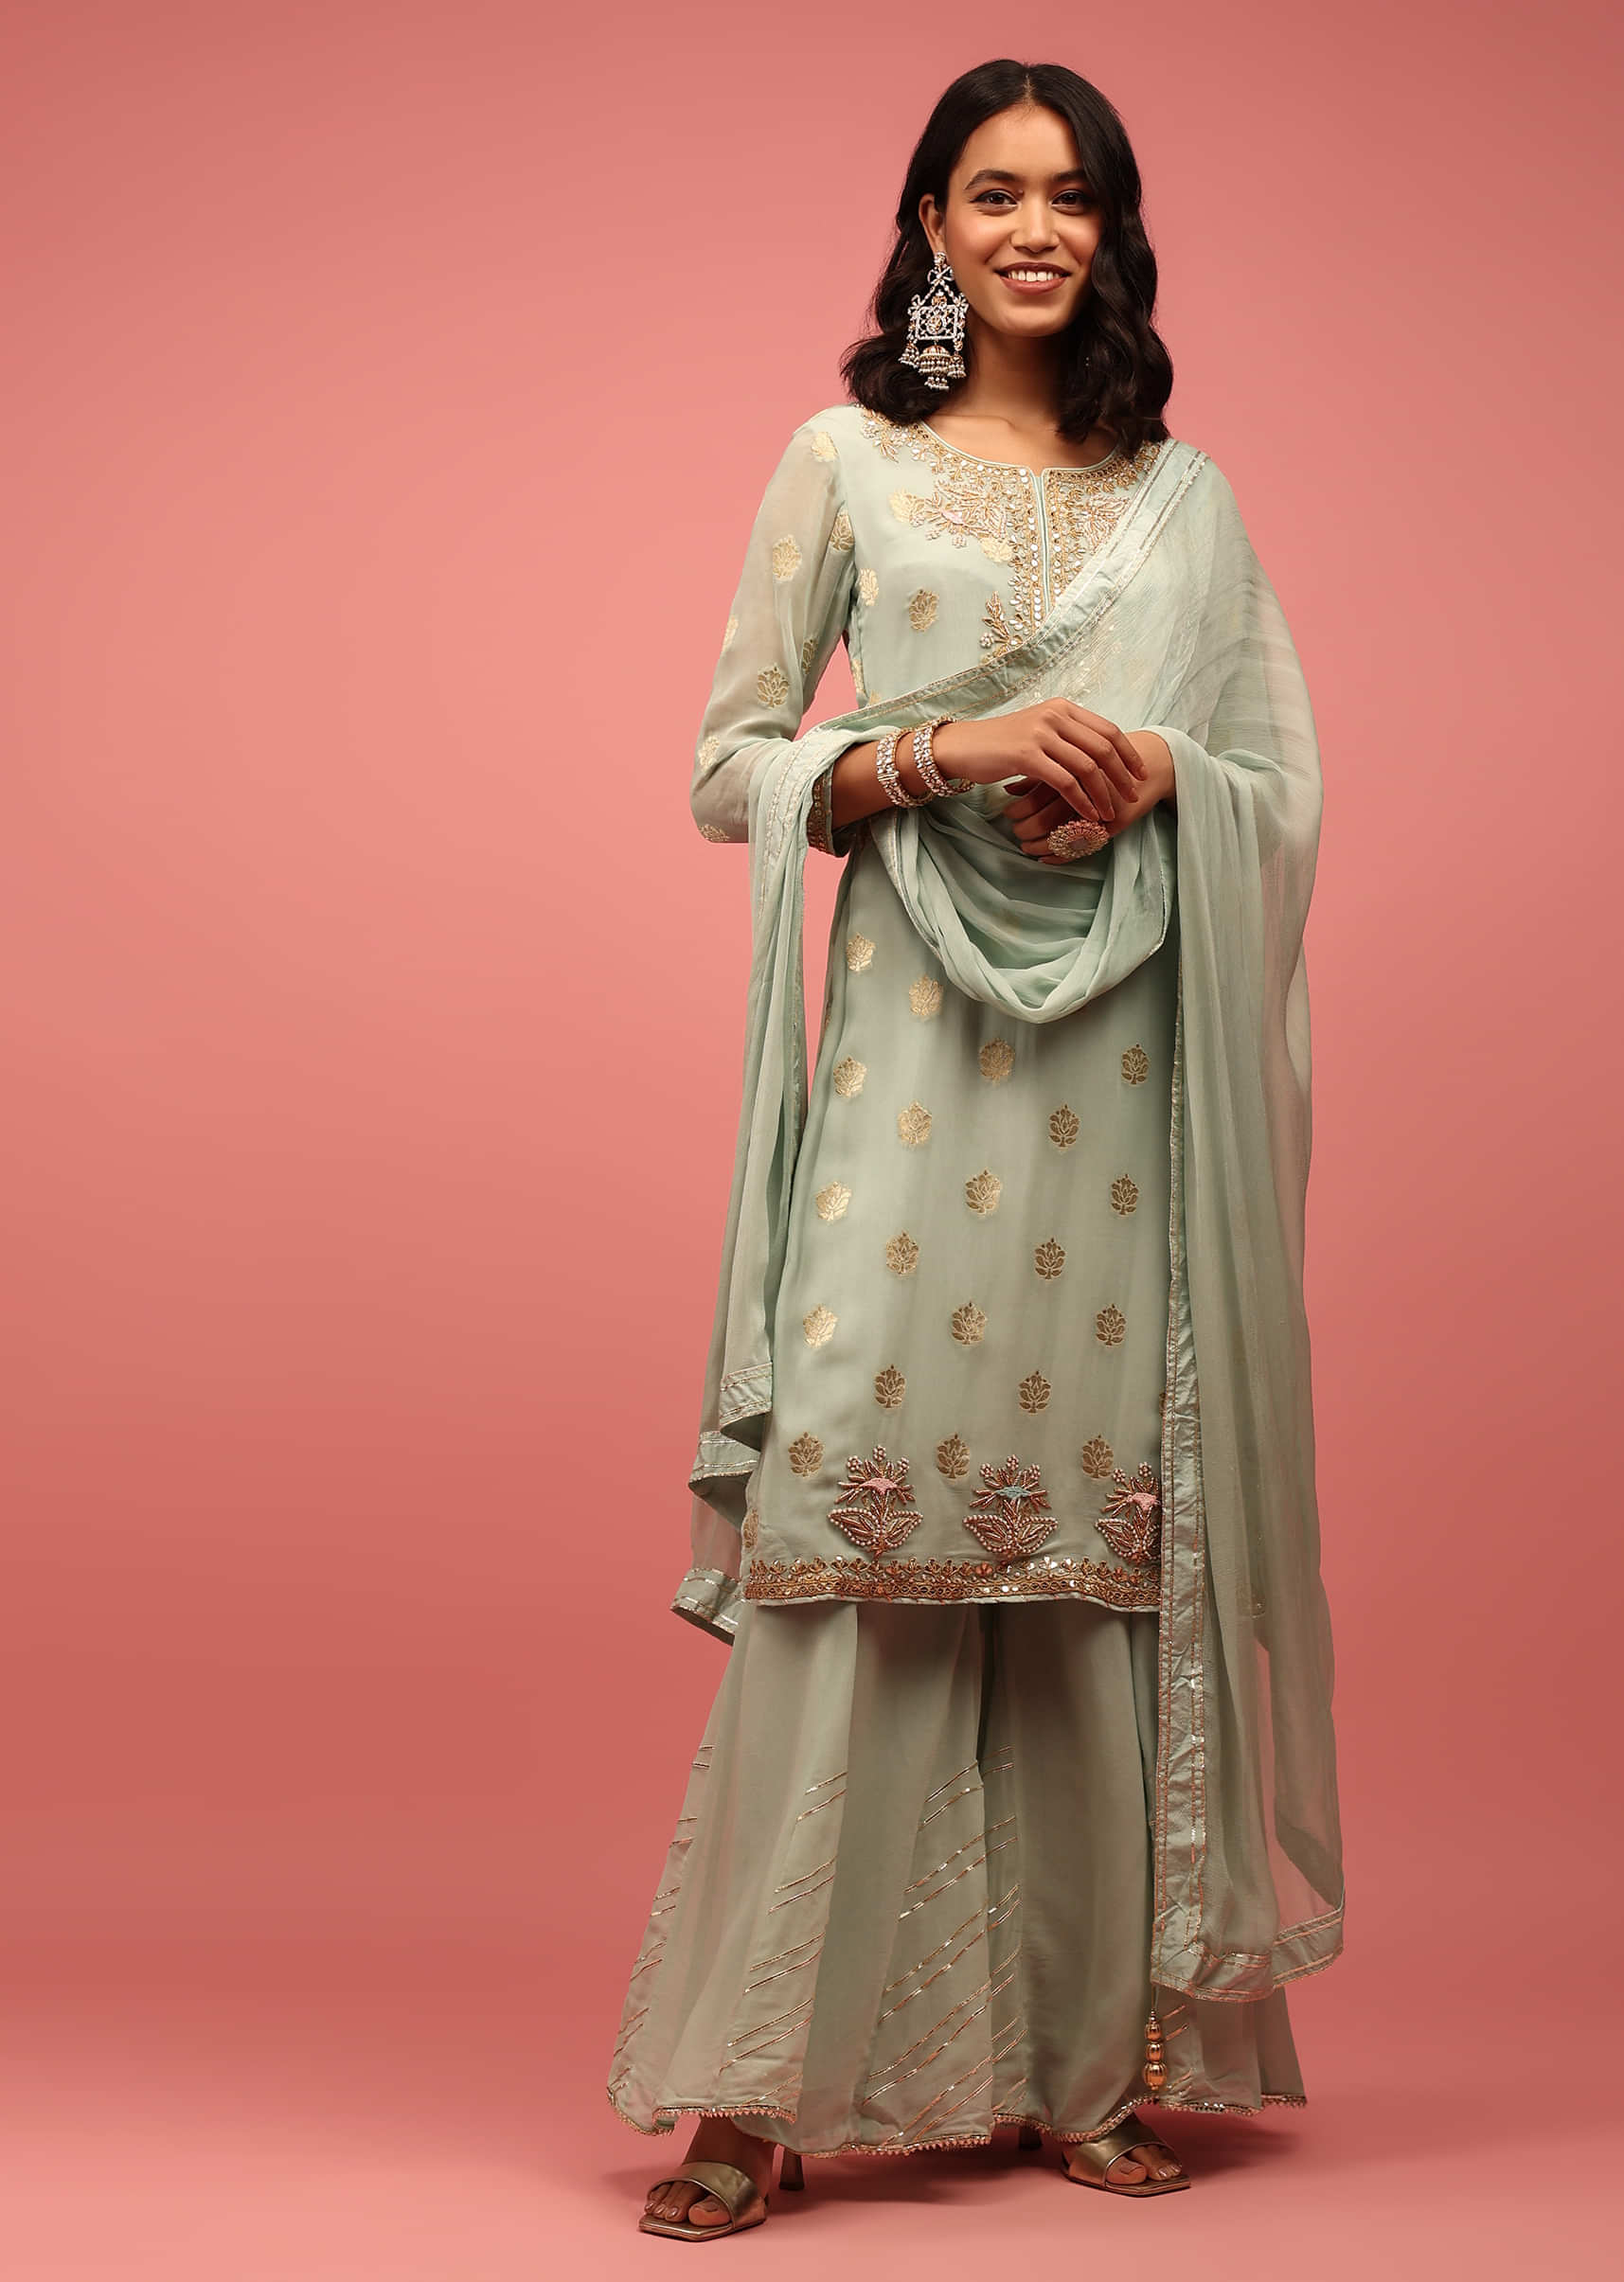 Light Green Palazzo Suit Set In Hand-Embellished Banarasi Georgette Crafted With Zardosi And Gotta Work